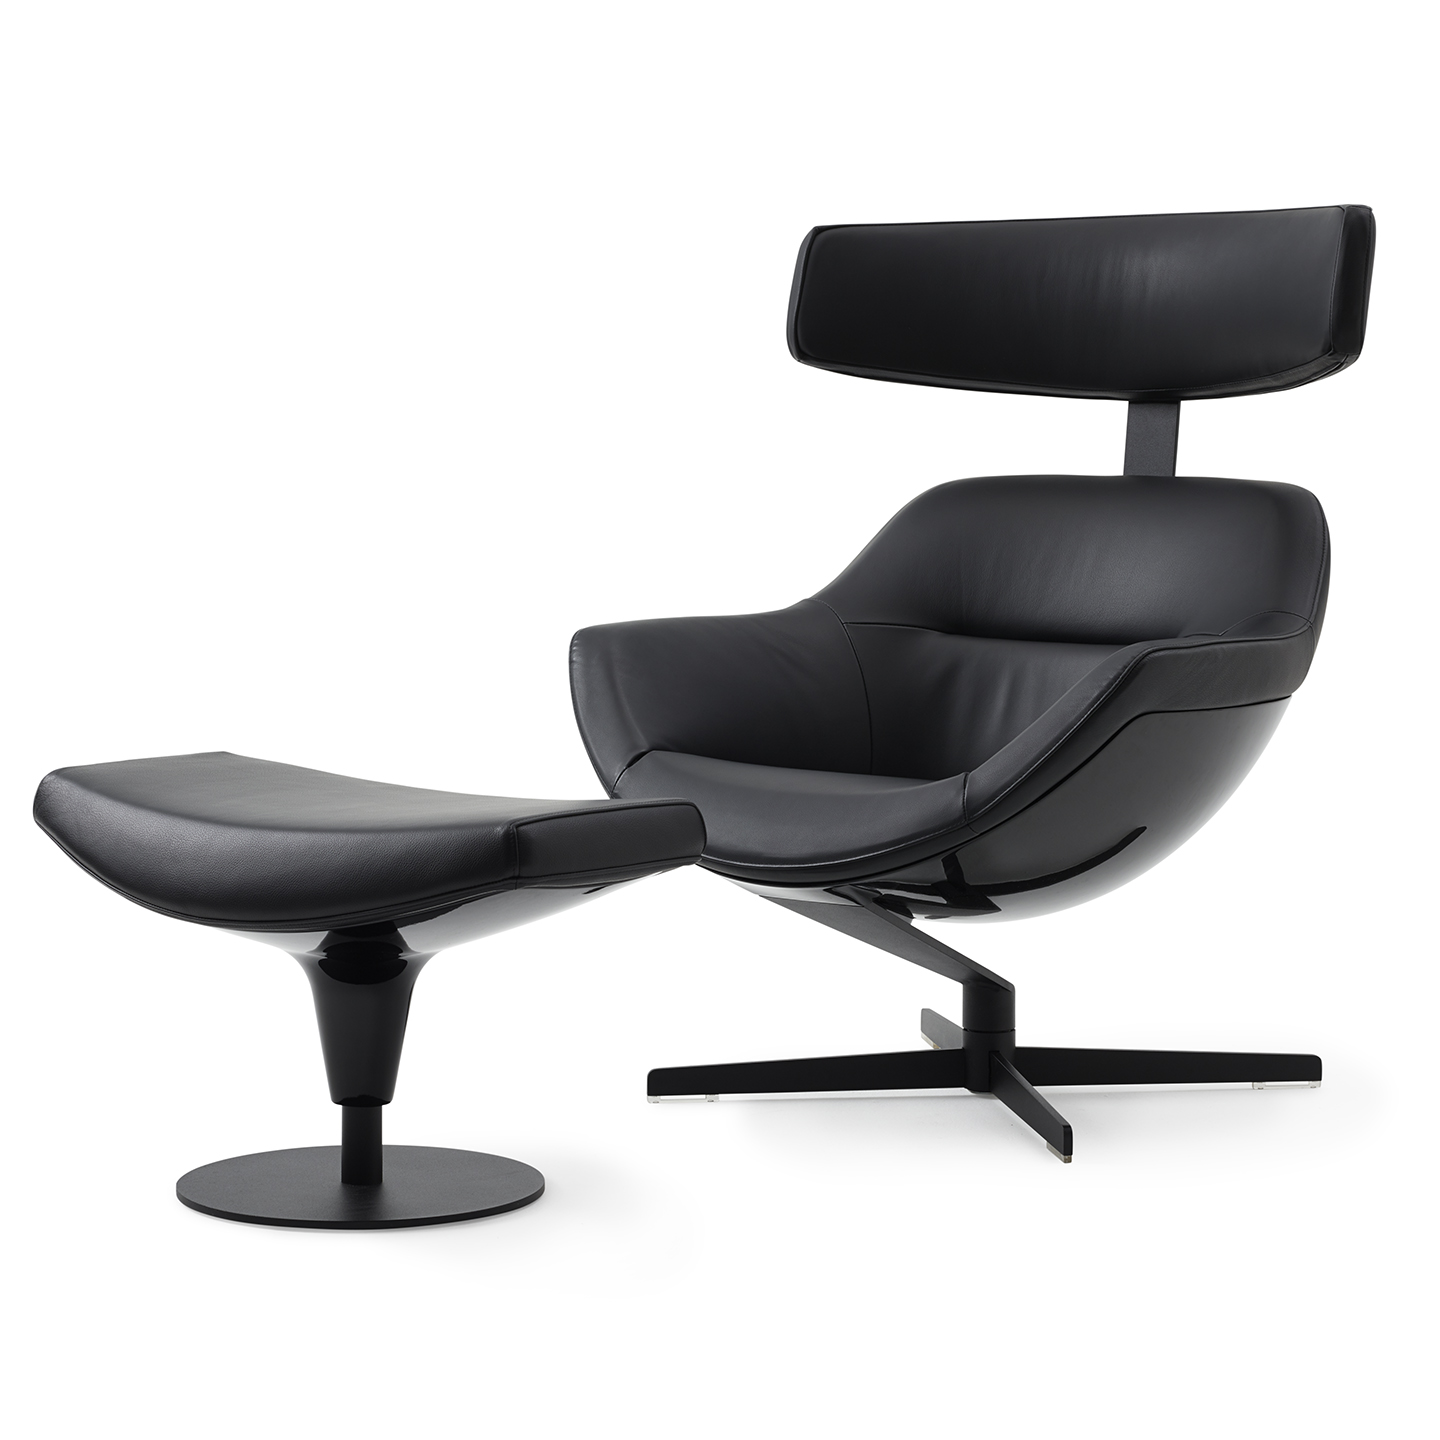 Haworth Auckland chair with ottoman in black leather